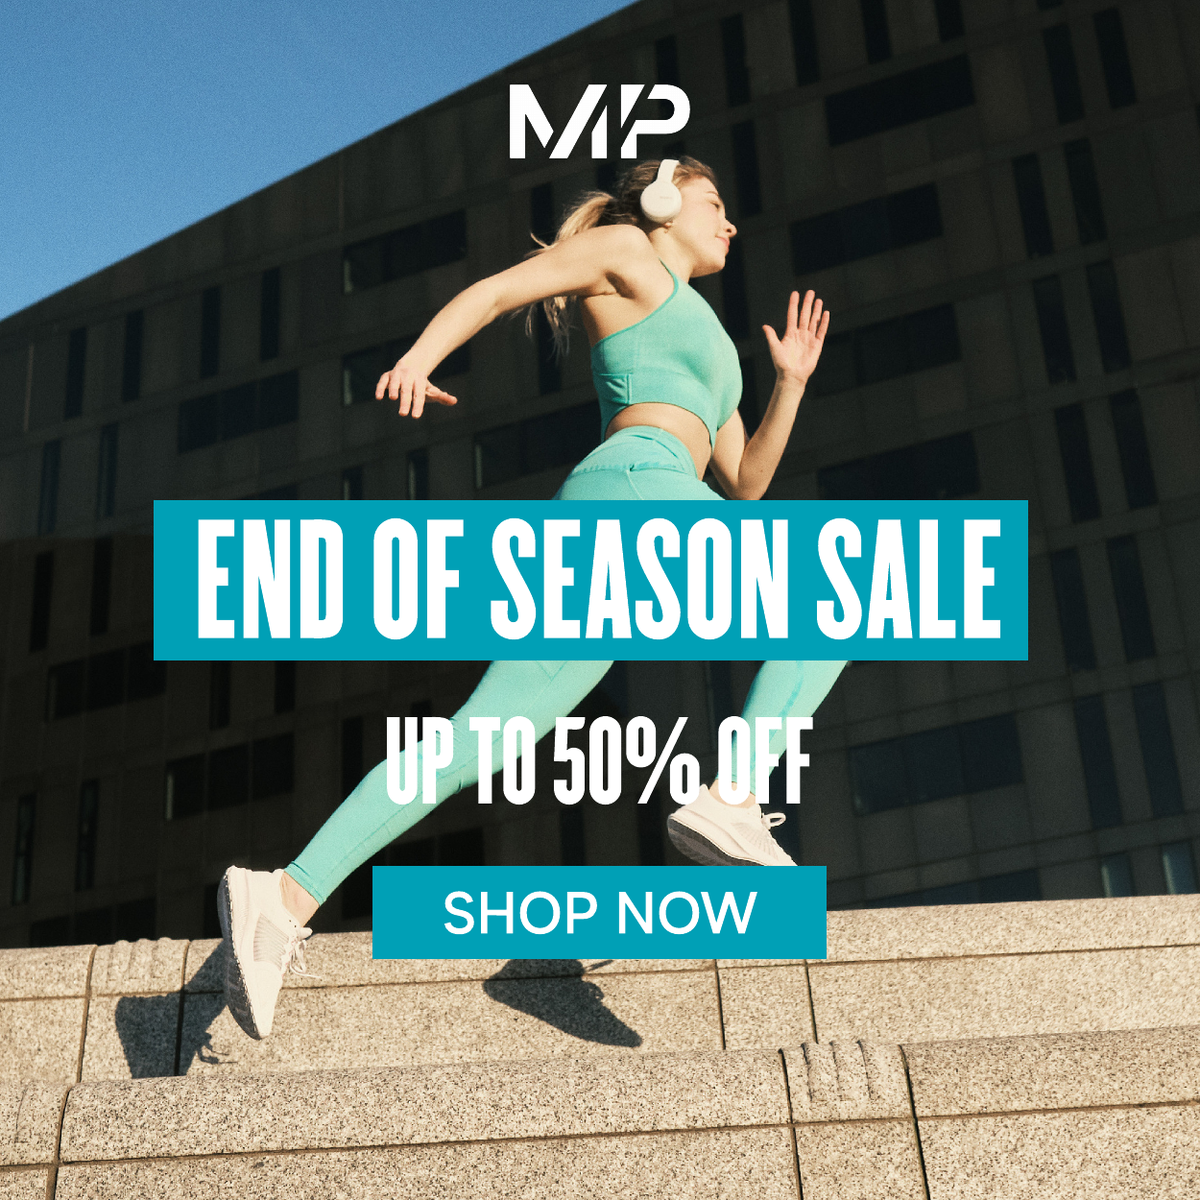 End Of Season Sale - Up to 50% Off